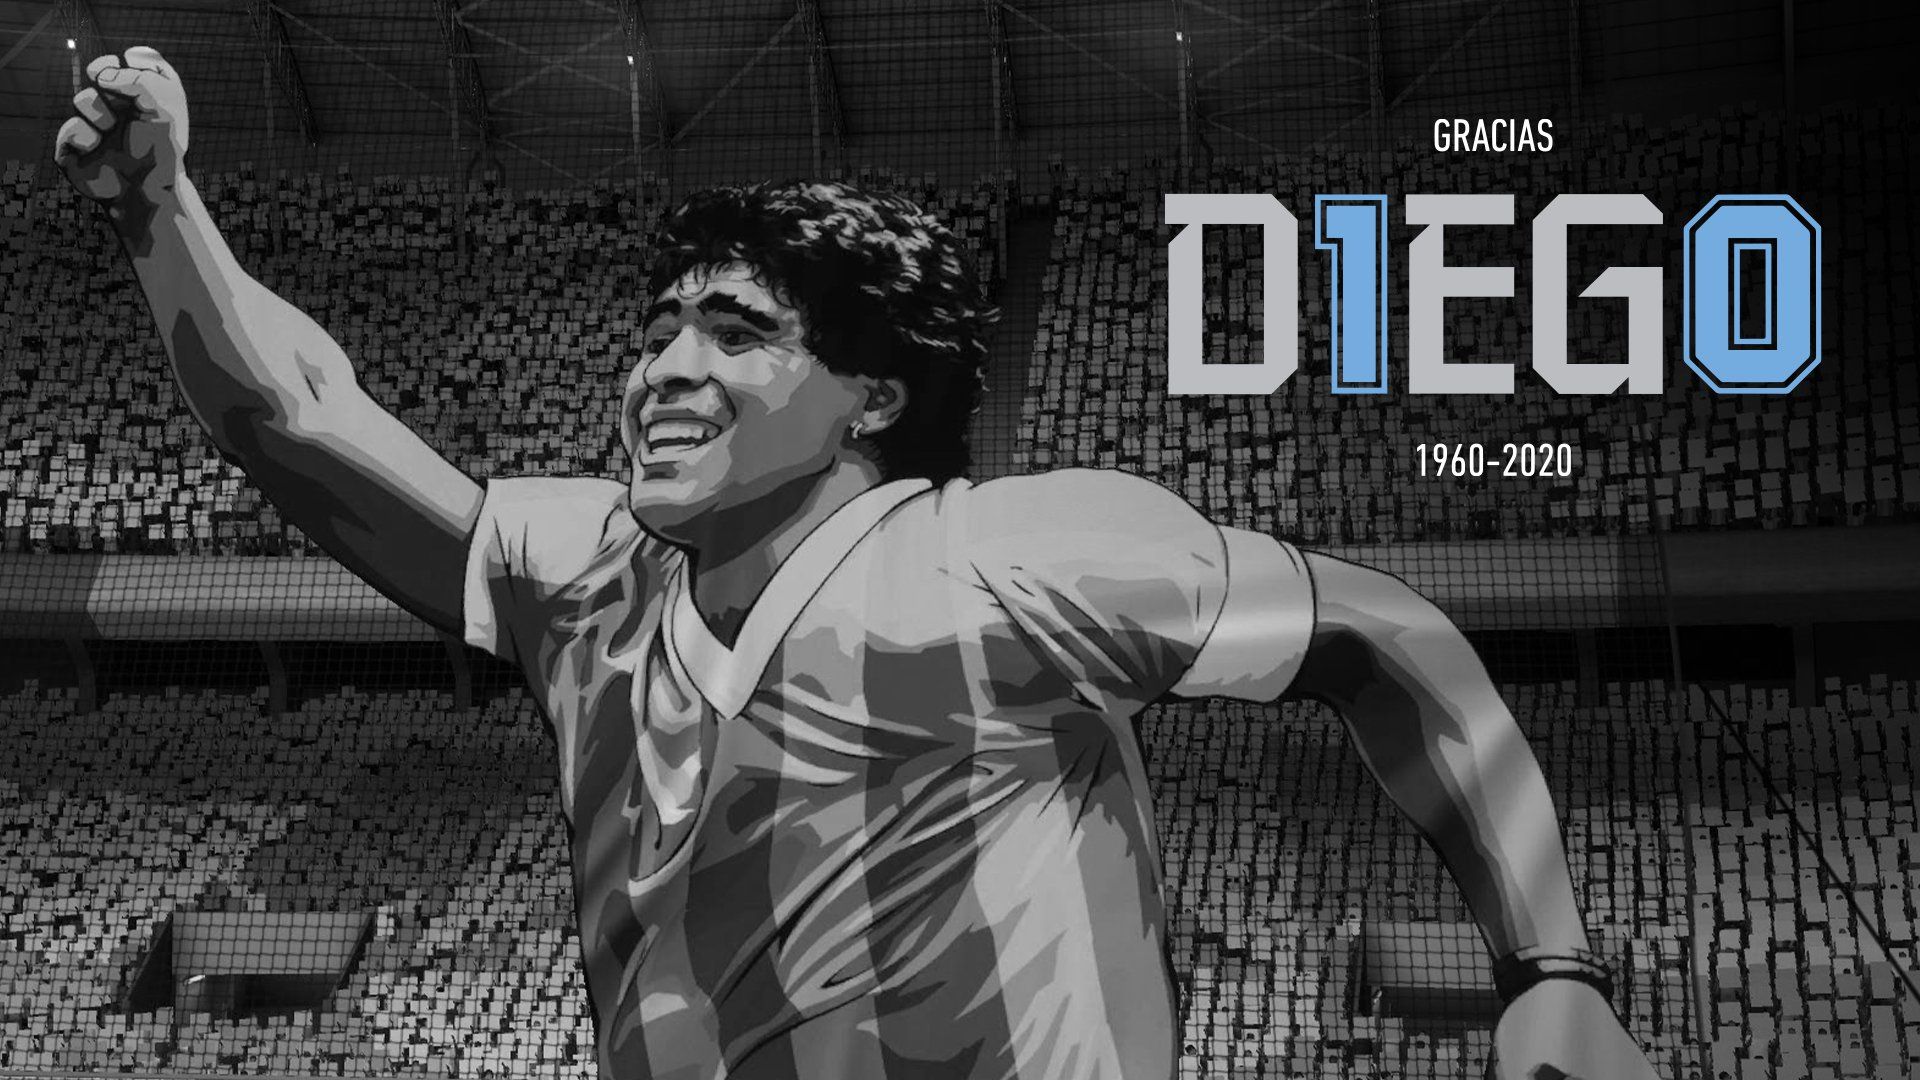 EA SPORTS FIFA footballer who defined his generation, and all to follow. Gracias, Diego